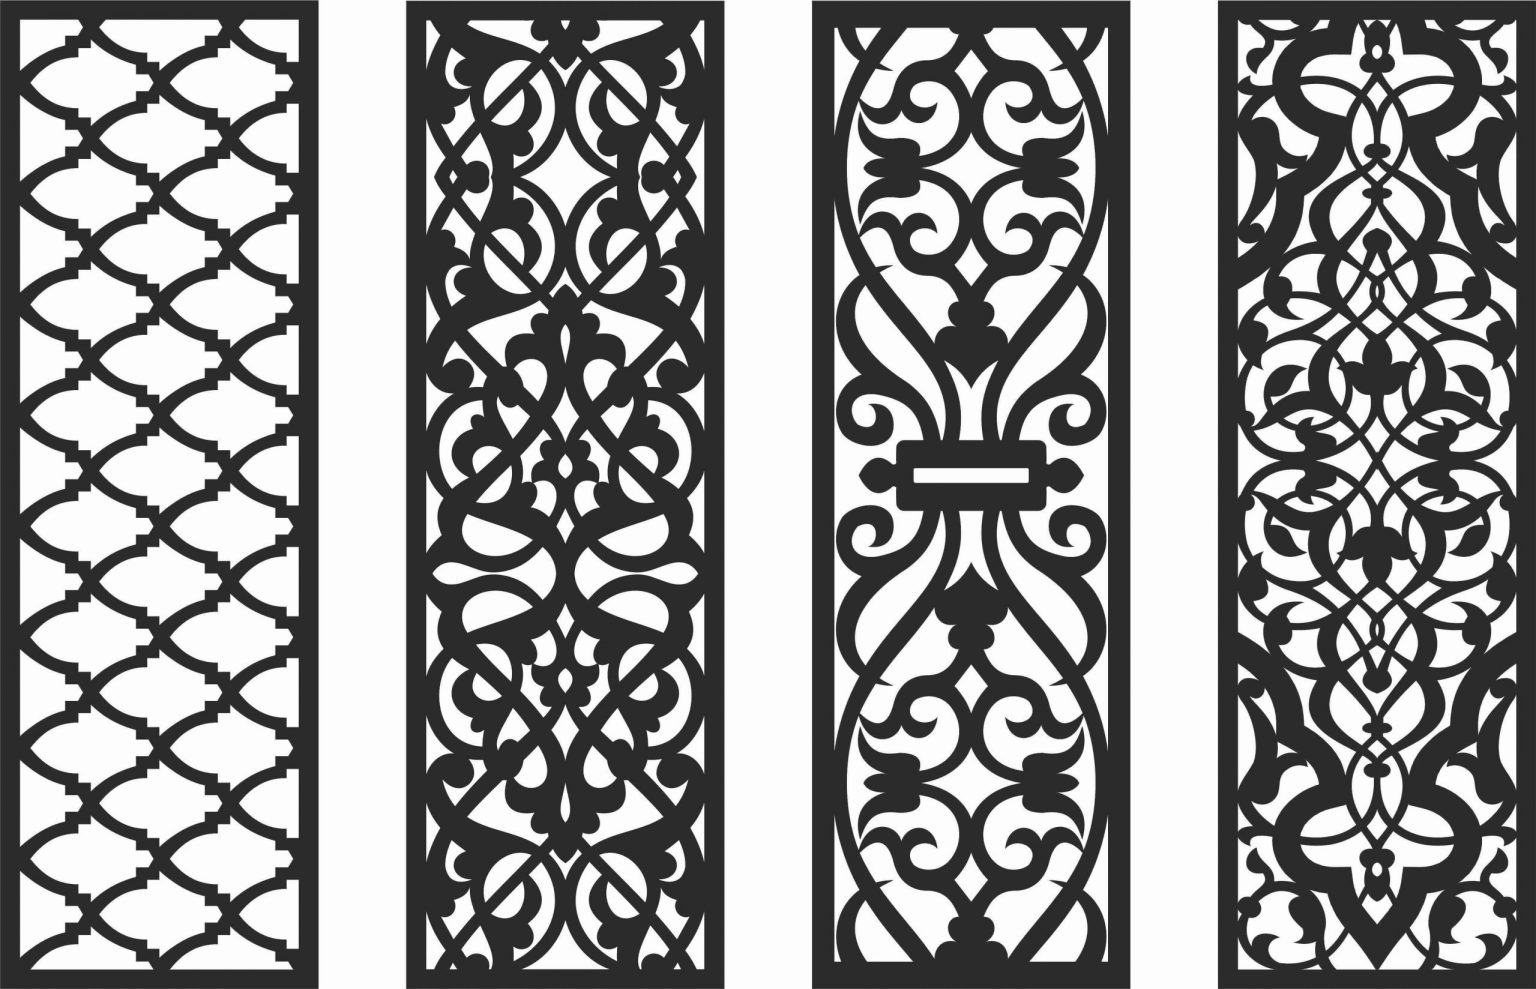 Decorative Screen Patterns For Laser Cutting 127 Free DXF File